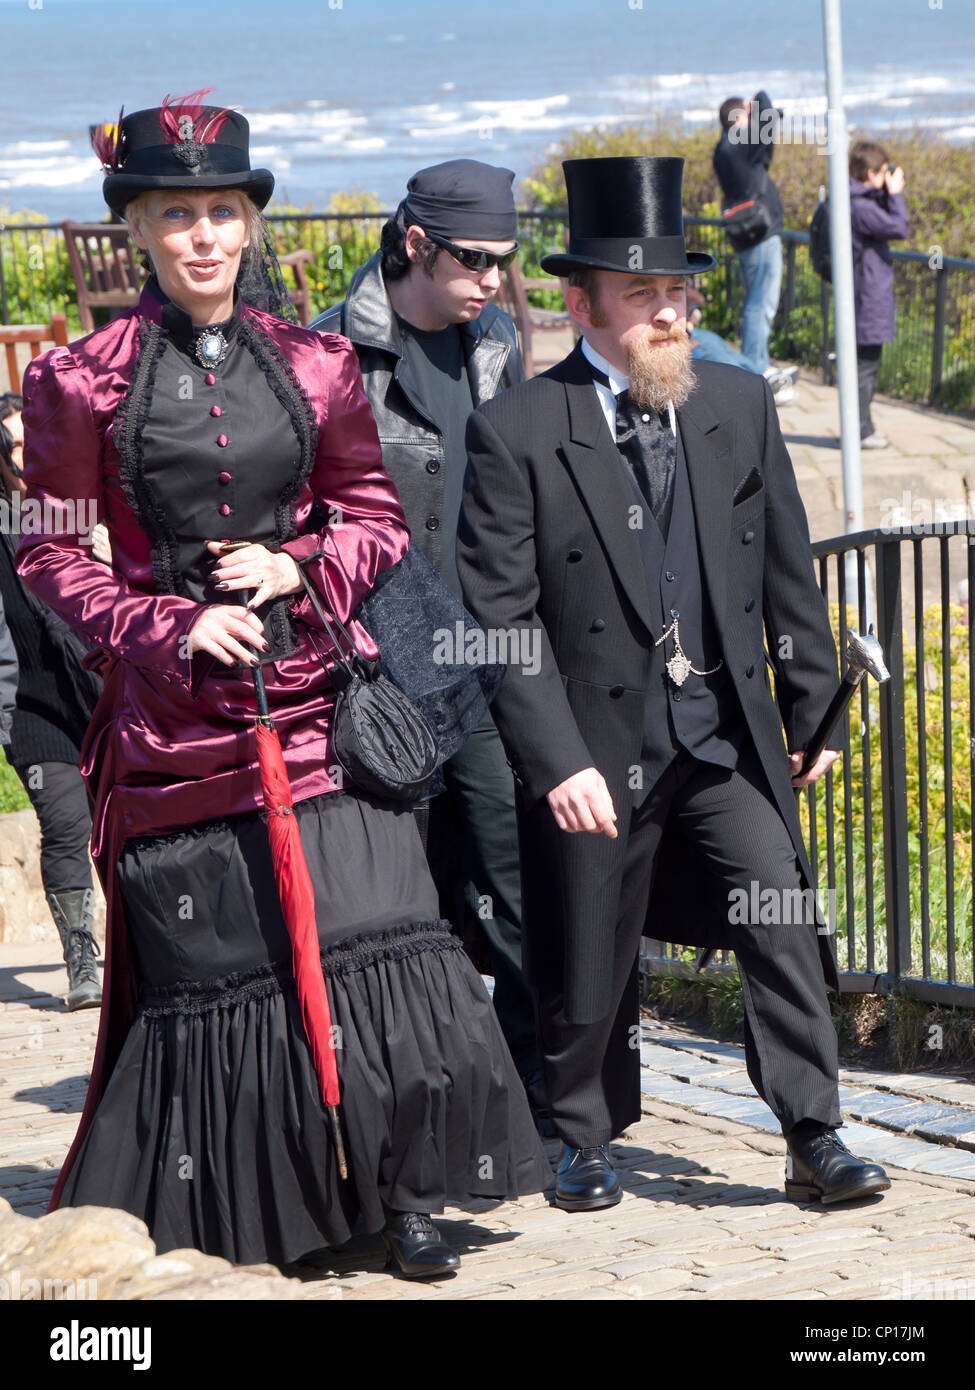 A man and his woman partner in Victorian Gothic dress at the